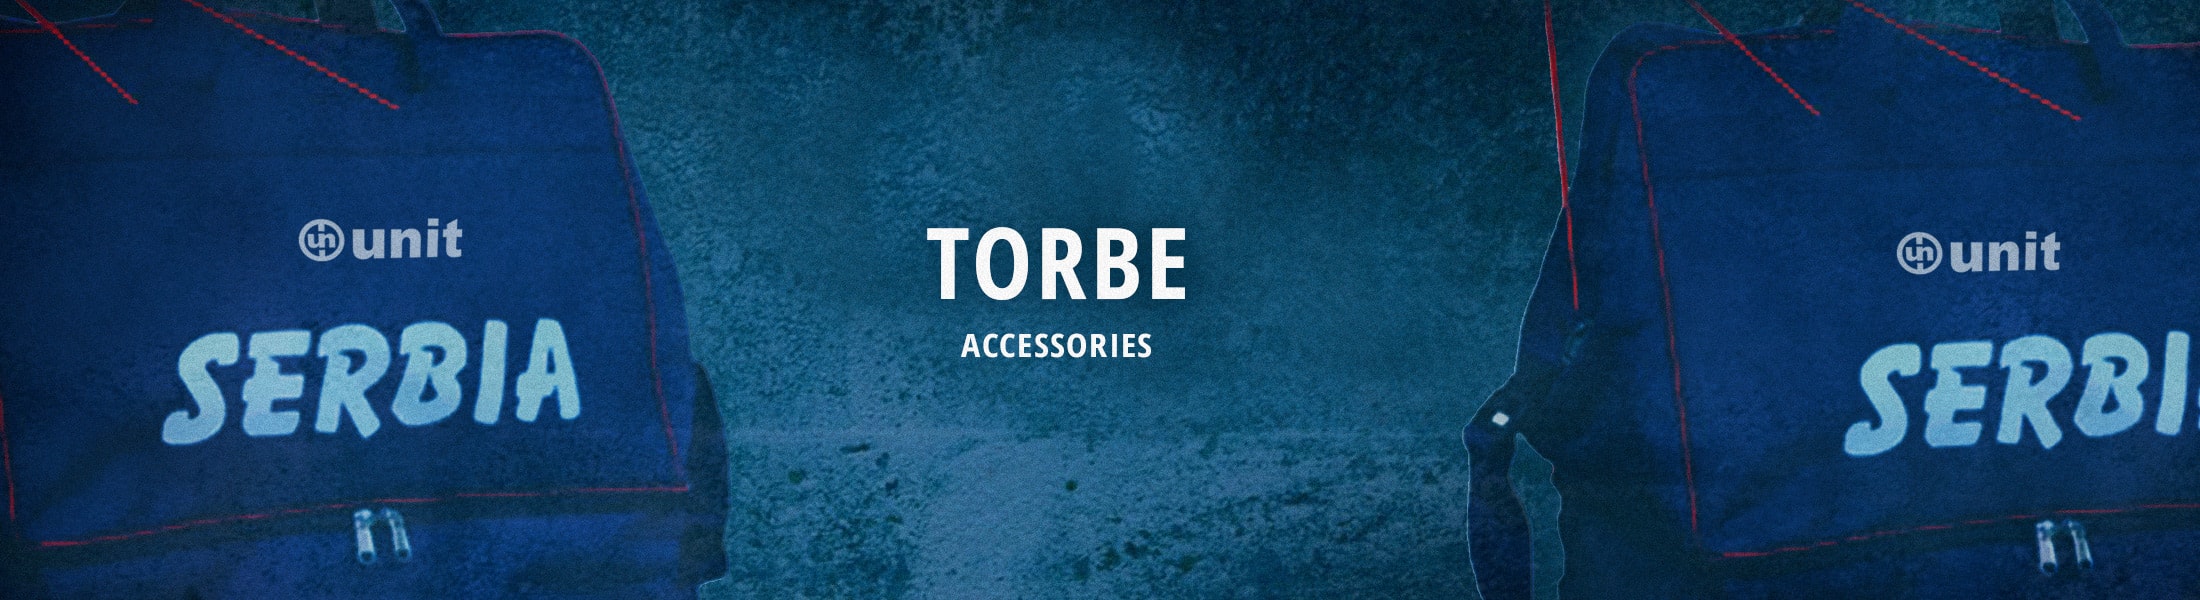 Accessories - Torbe